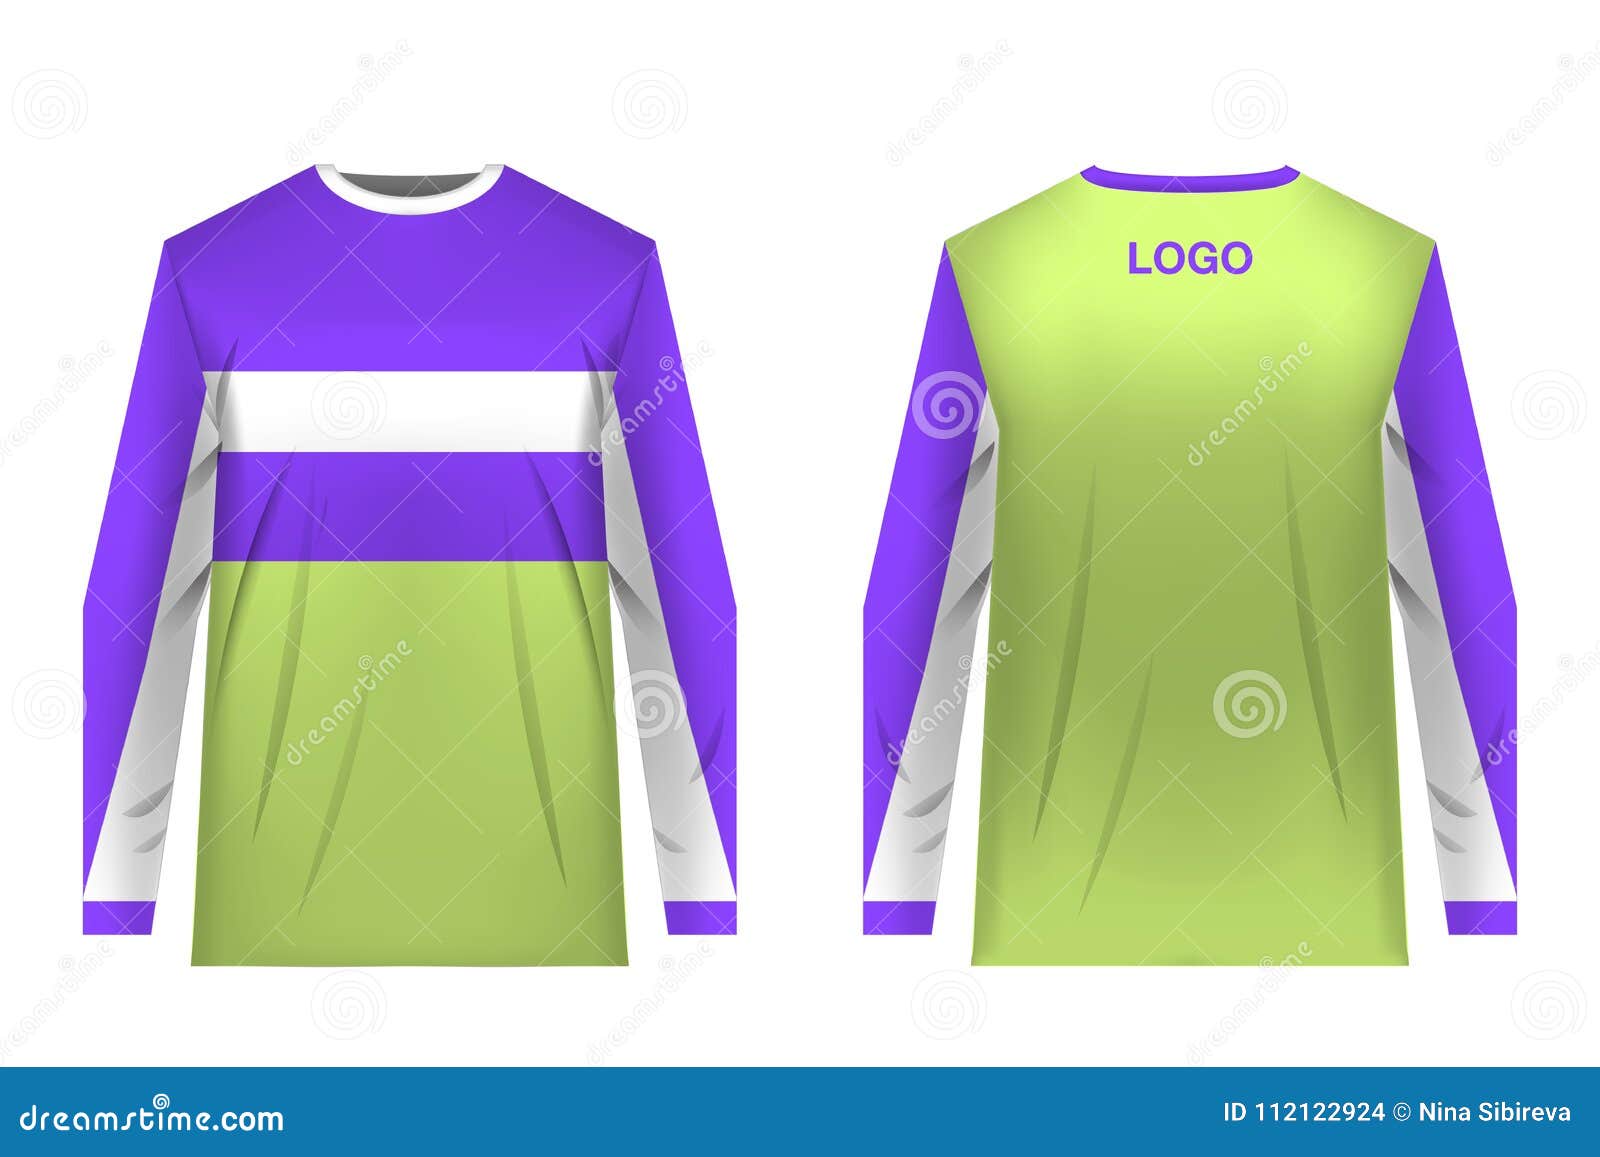 Mtb jersey templates Royalty Free Vector Image